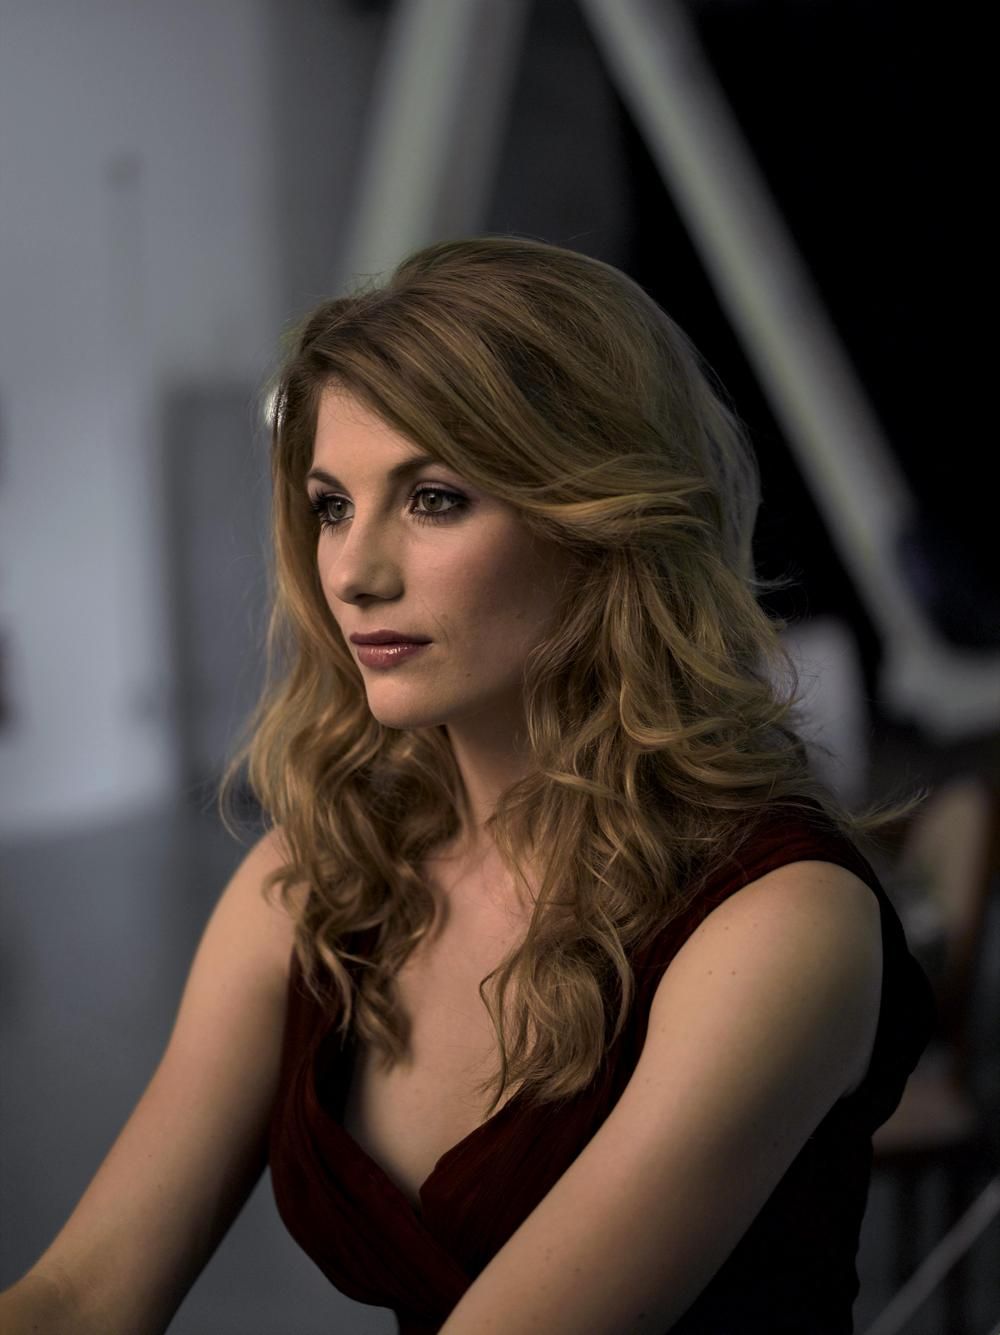 49 Jodie Whittaker Nude Pictures That Are Sure To Put Her Under The Spotlight 80